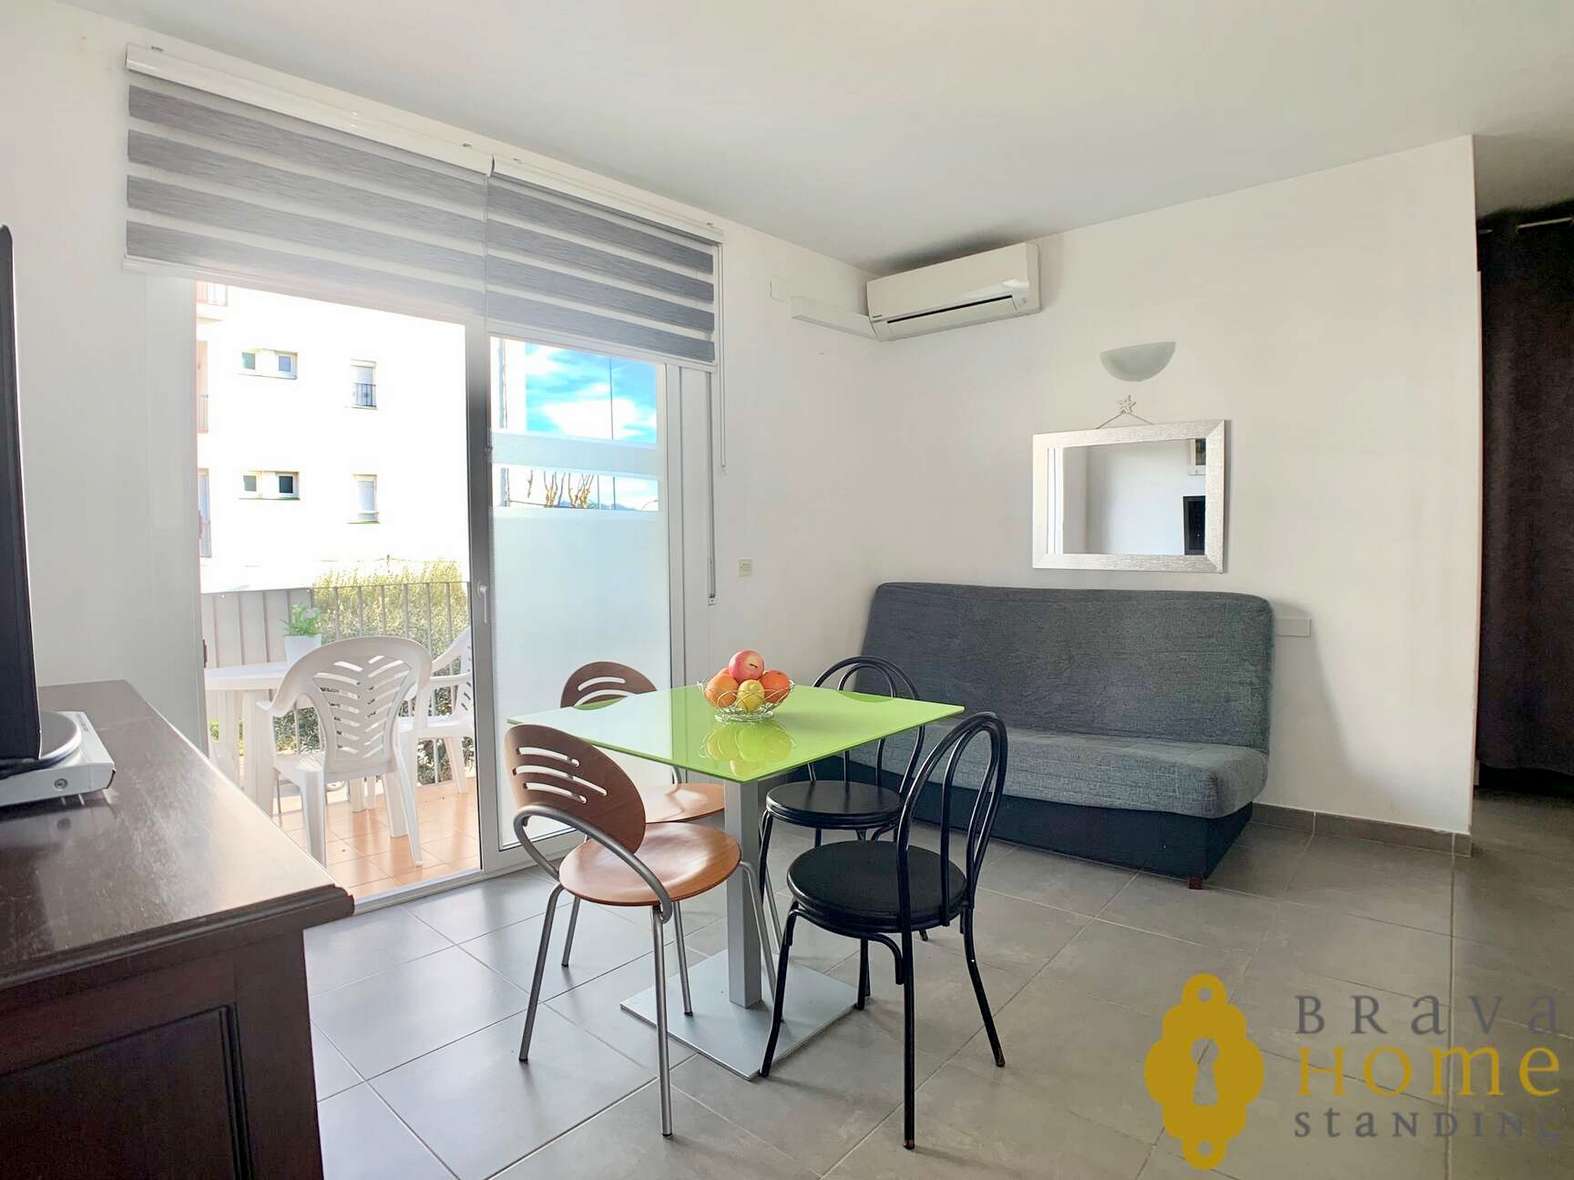 Beautiful one bedroom apartment in the center of Empuriabrava near the beach